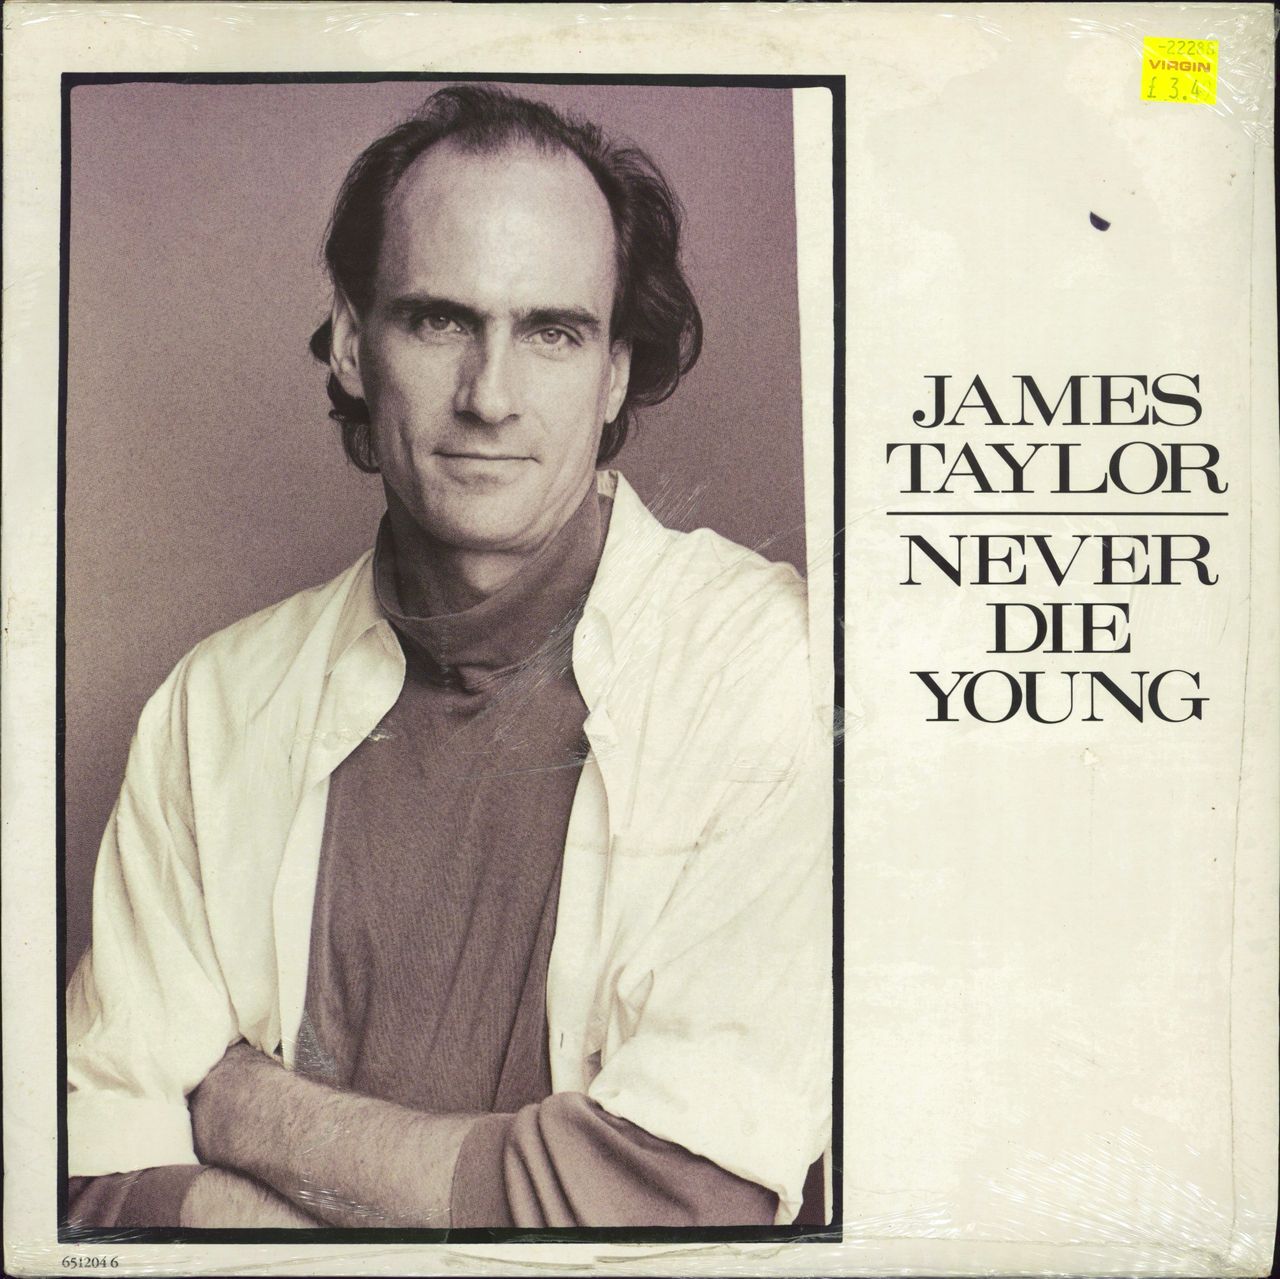 James Taylor Never Die Young - Shrink UK Promo 12" vinyl single (12 inch record / Maxi-single) 6512046